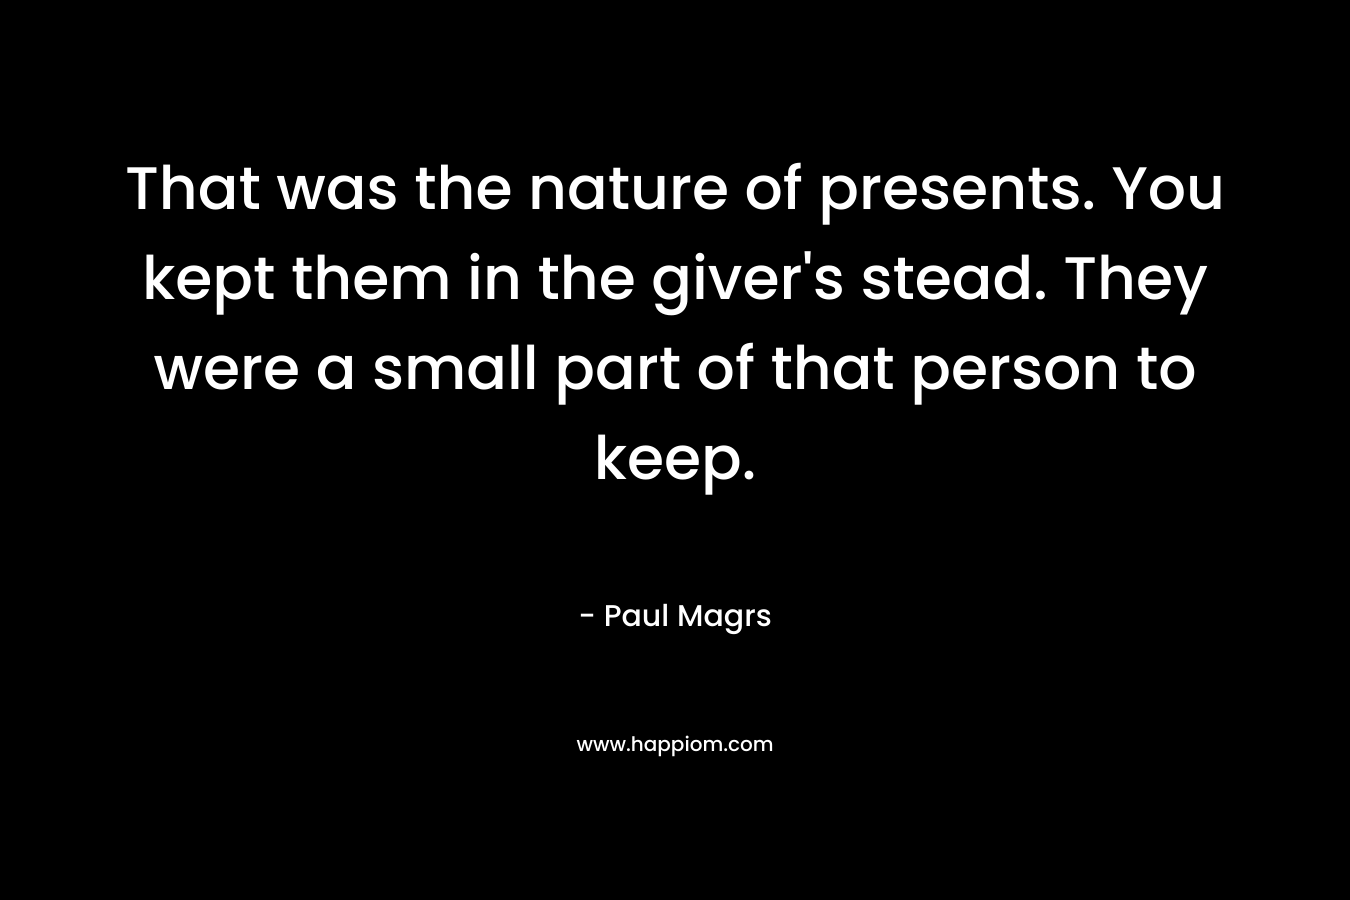 That was the nature of presents. You kept them in the giver’s stead. They were a small part of that person to keep. – Paul Magrs